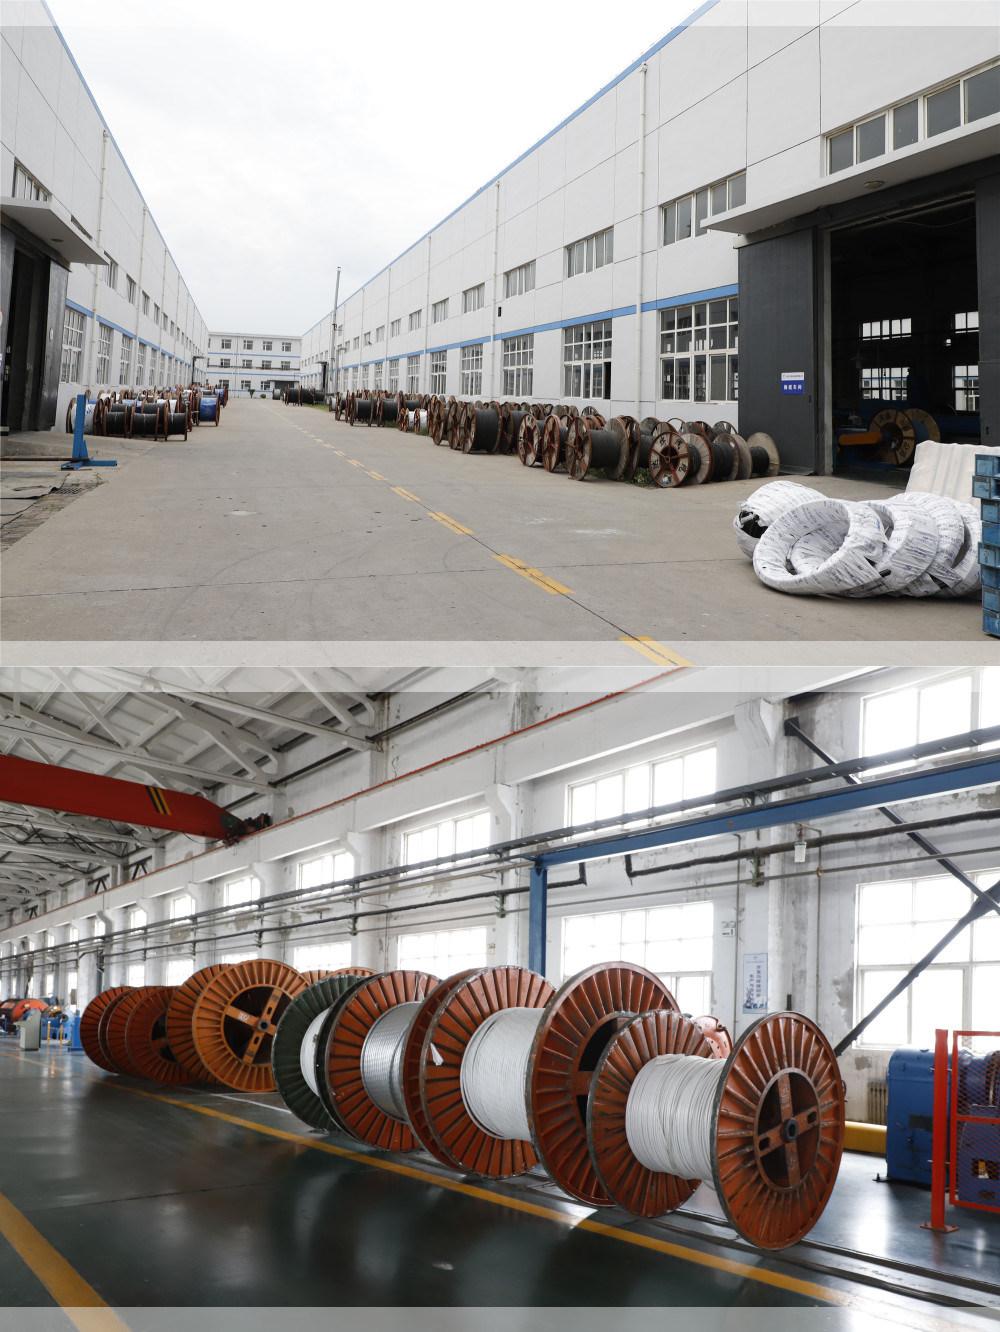 Flexible Copper Conductor Electric Wires Cables for Railway Wiring Harness Electric Coaxial Cable